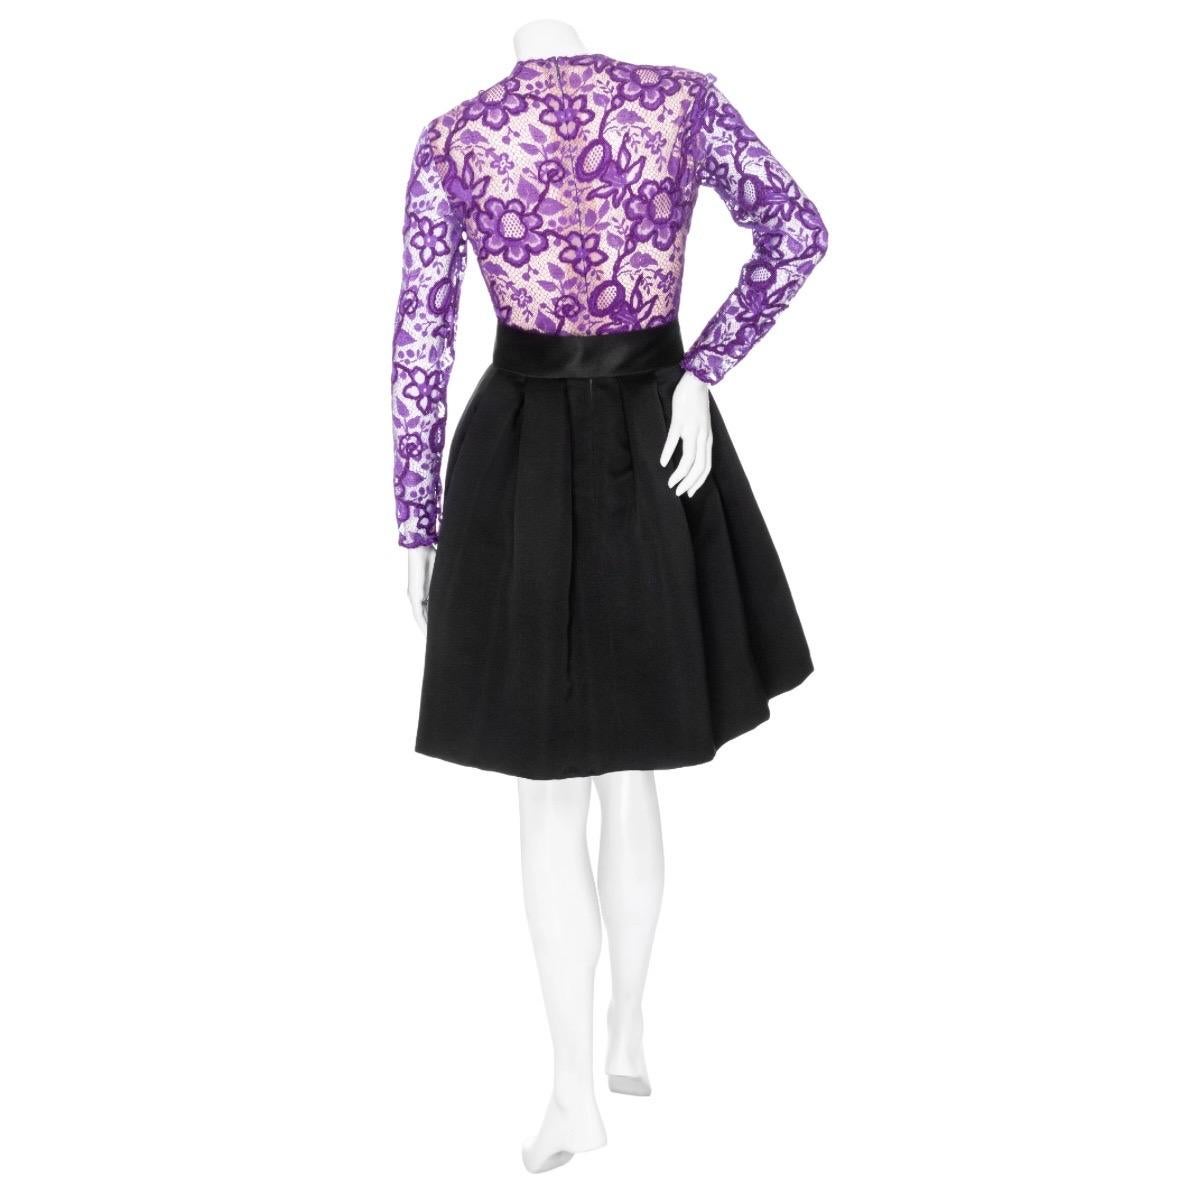 Galanos Vintage Purple and Black Lace Bow Dress 

Circa 1980s; for I. Magnin
Black satin; purple lace bodice
Long sleeve with snap fastening at cuffs
Round neckline
Side seam pockets
Optional self-tie bow sash; reversible to wear in front or